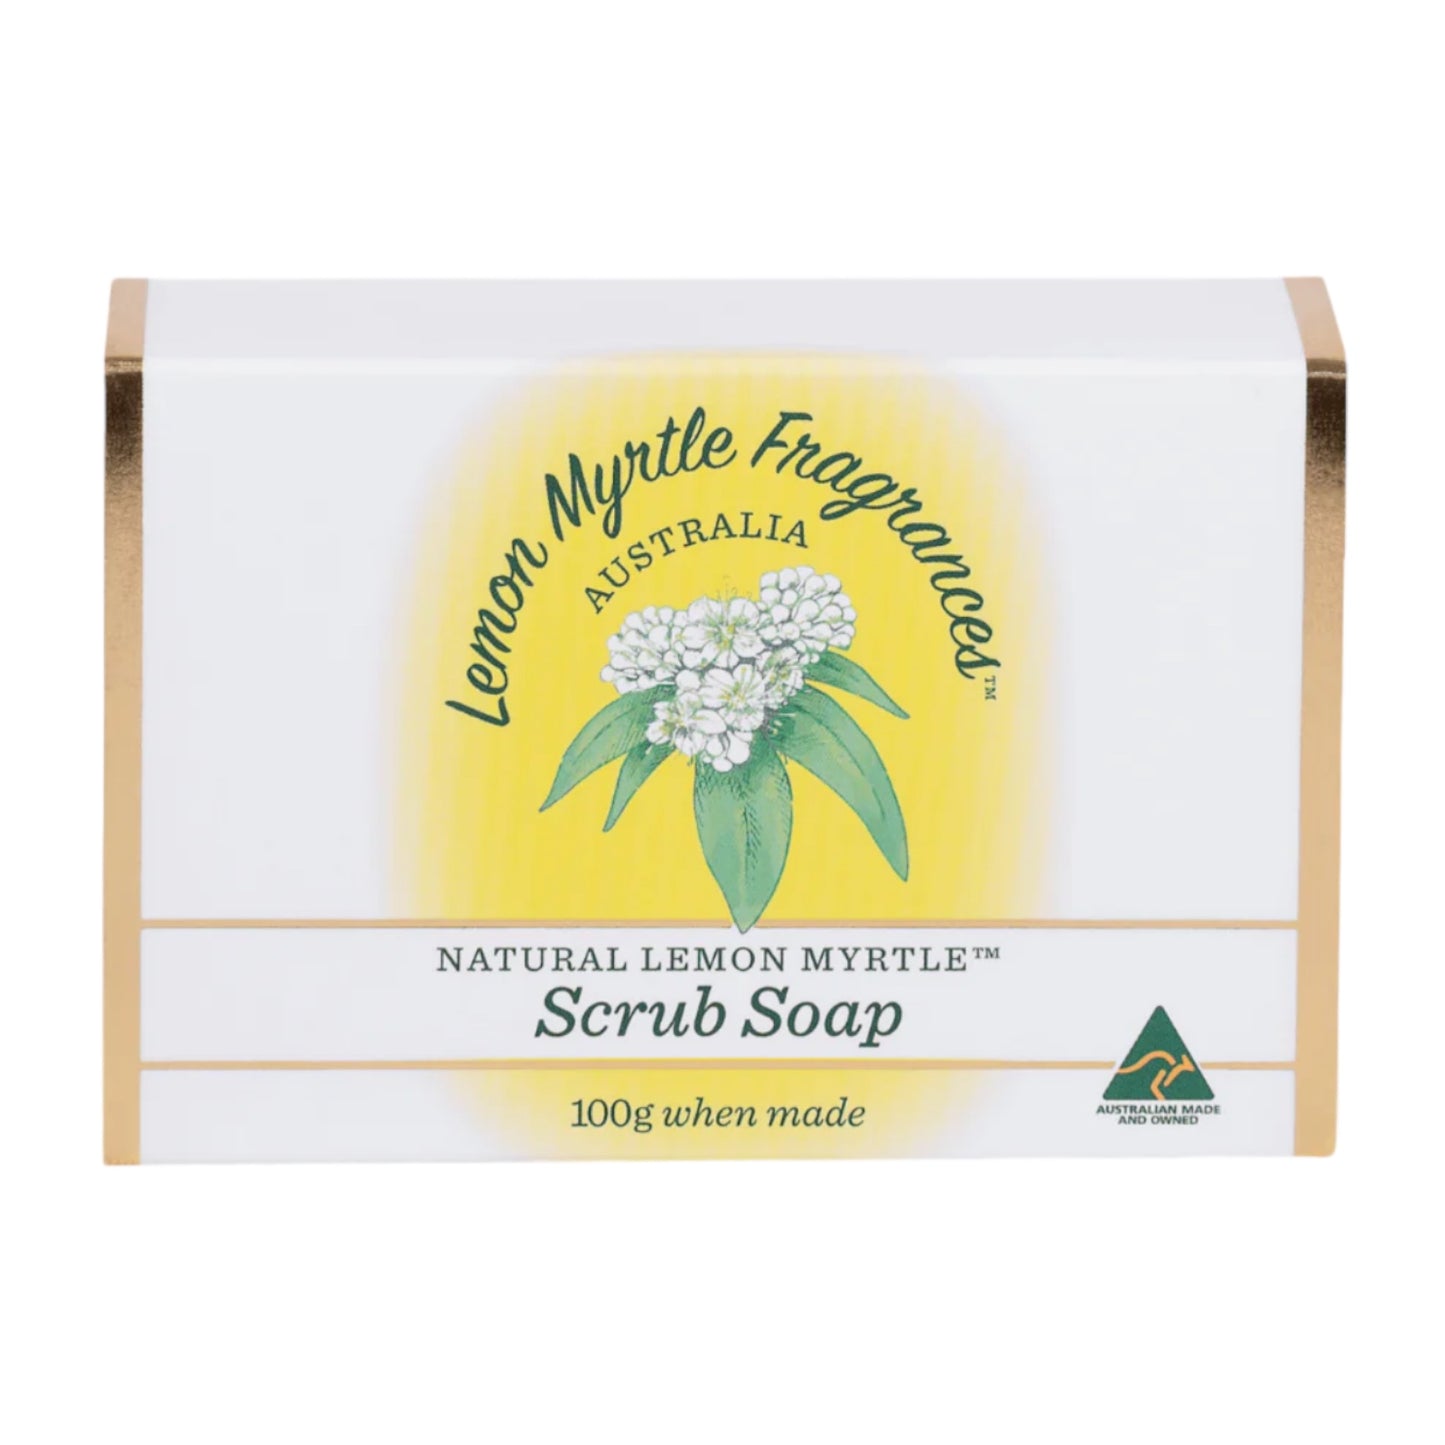 Lemon Myrtle Soap Allen Designs Bag Sewing Stitch Gift - The Renmy Store Homewares & Gifts 